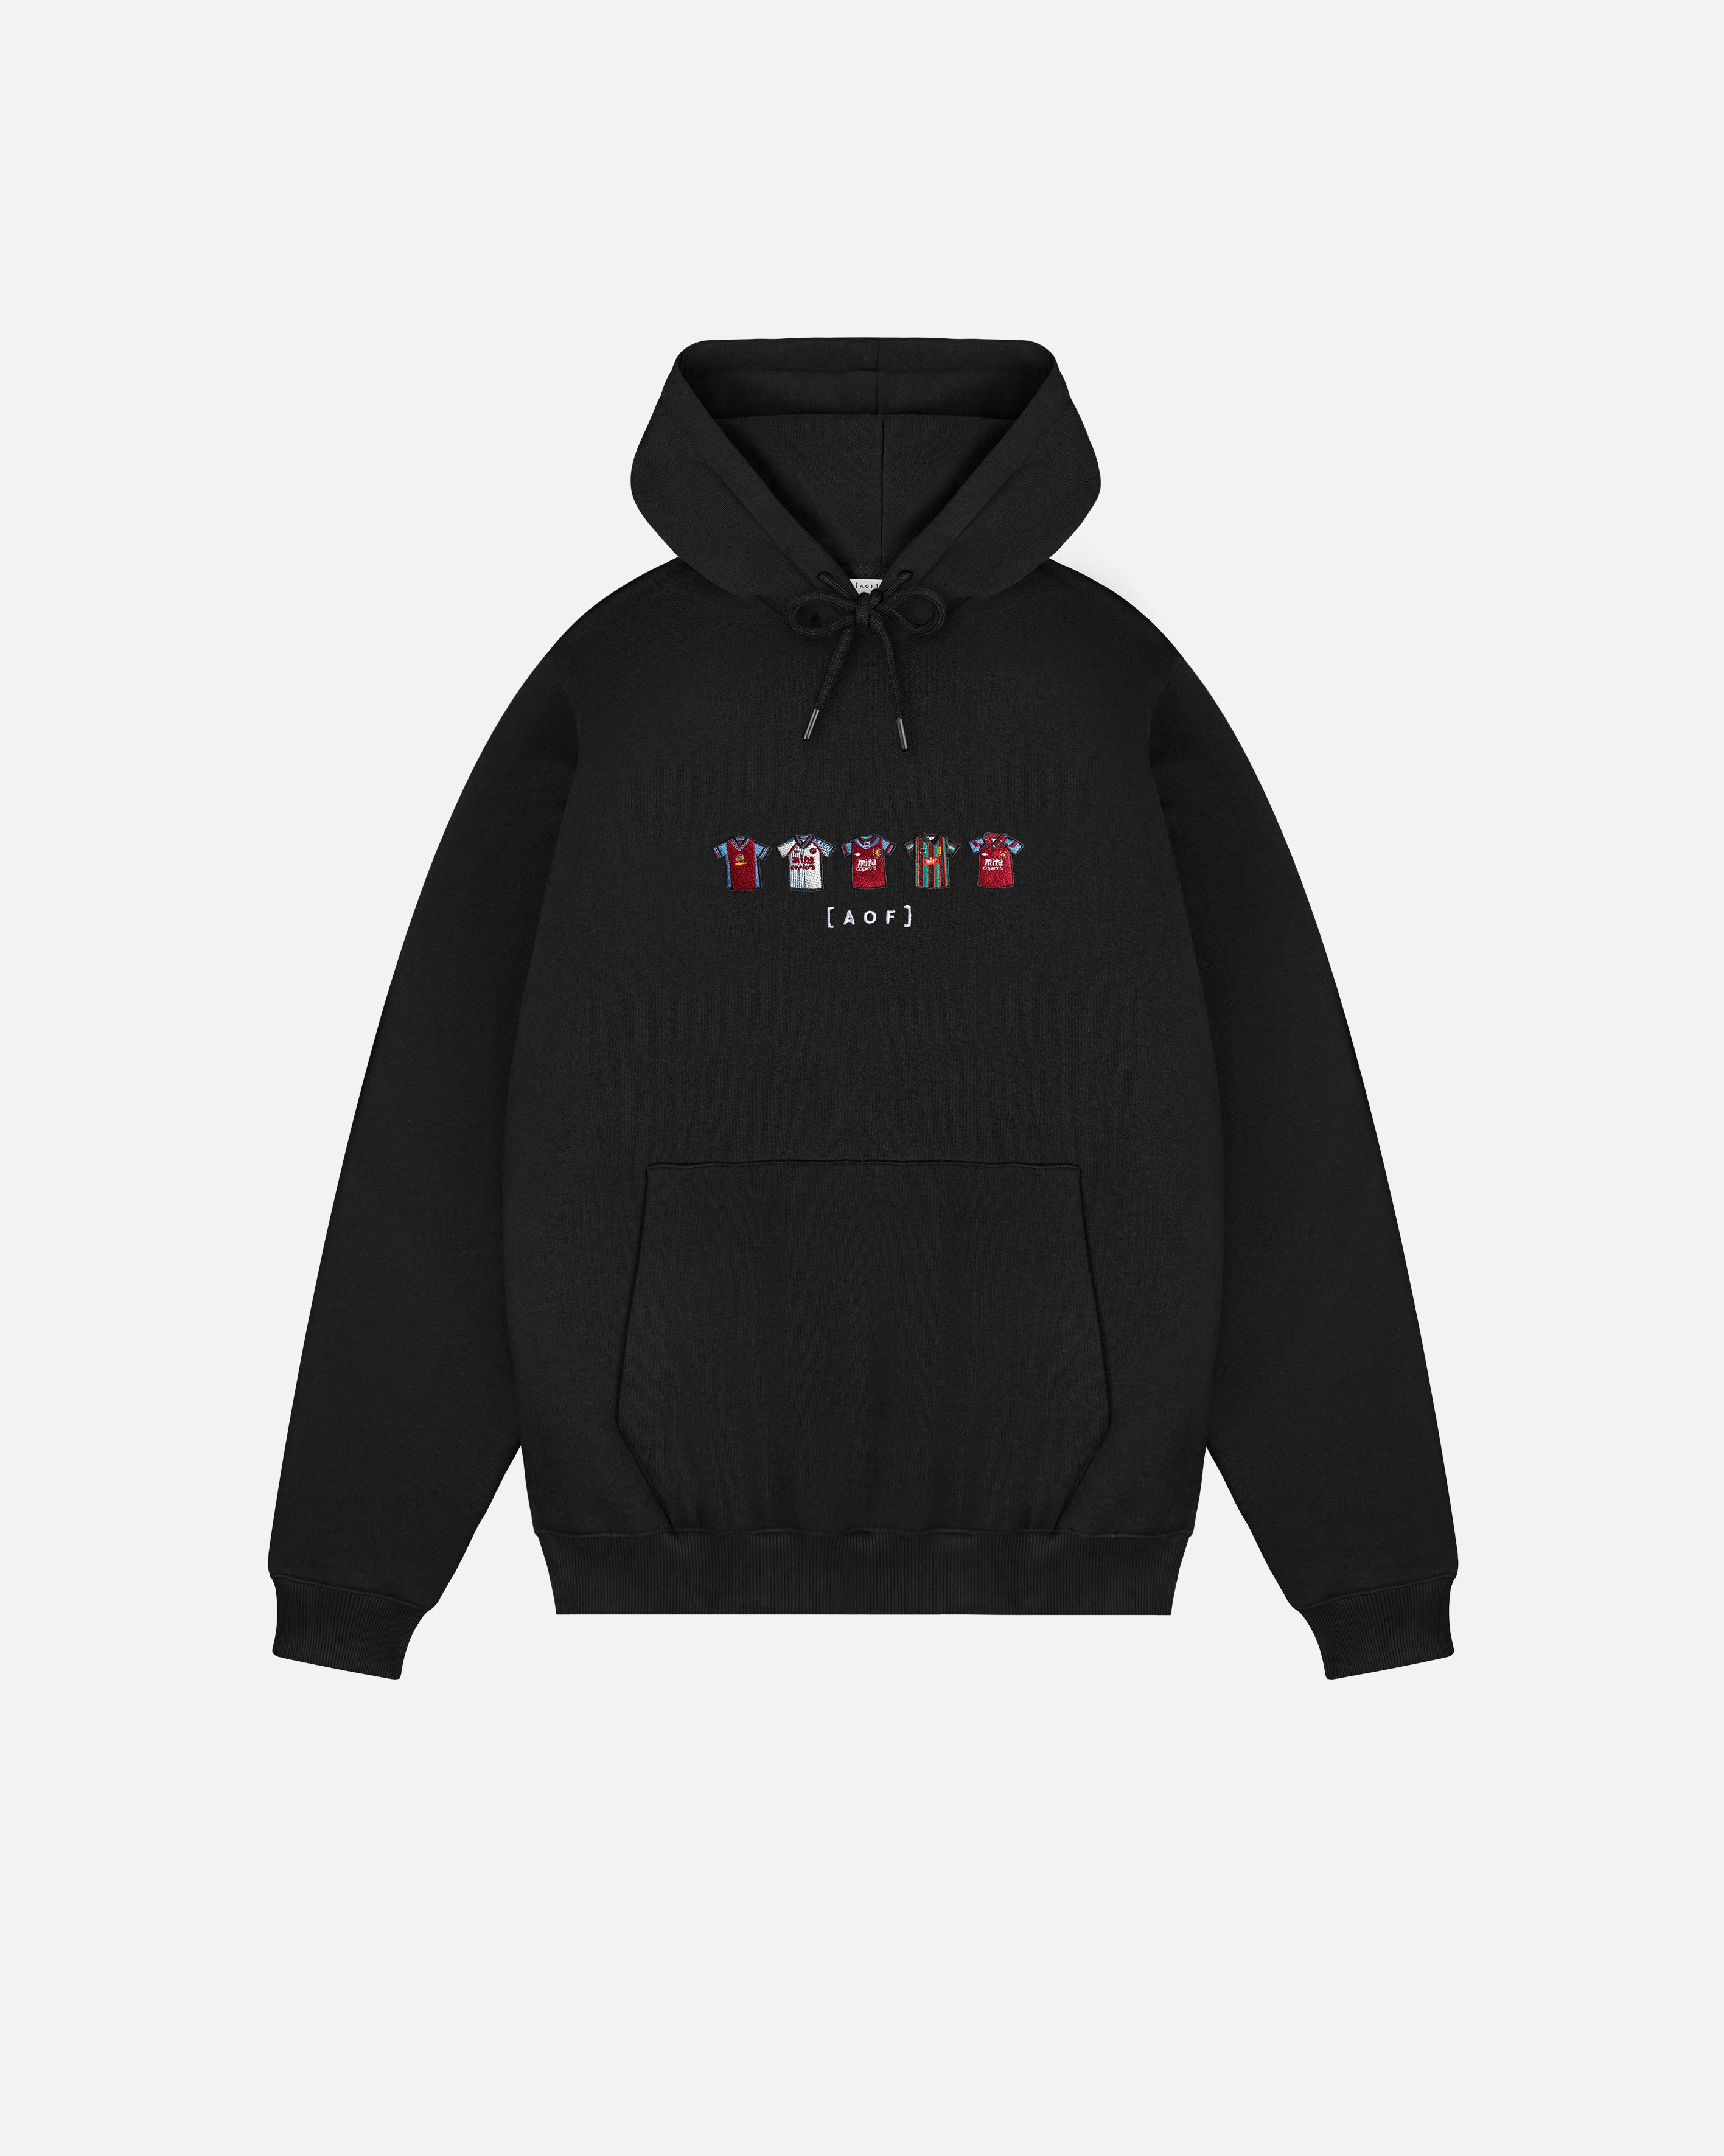 AVFC Embroidered Classics - Hoodie